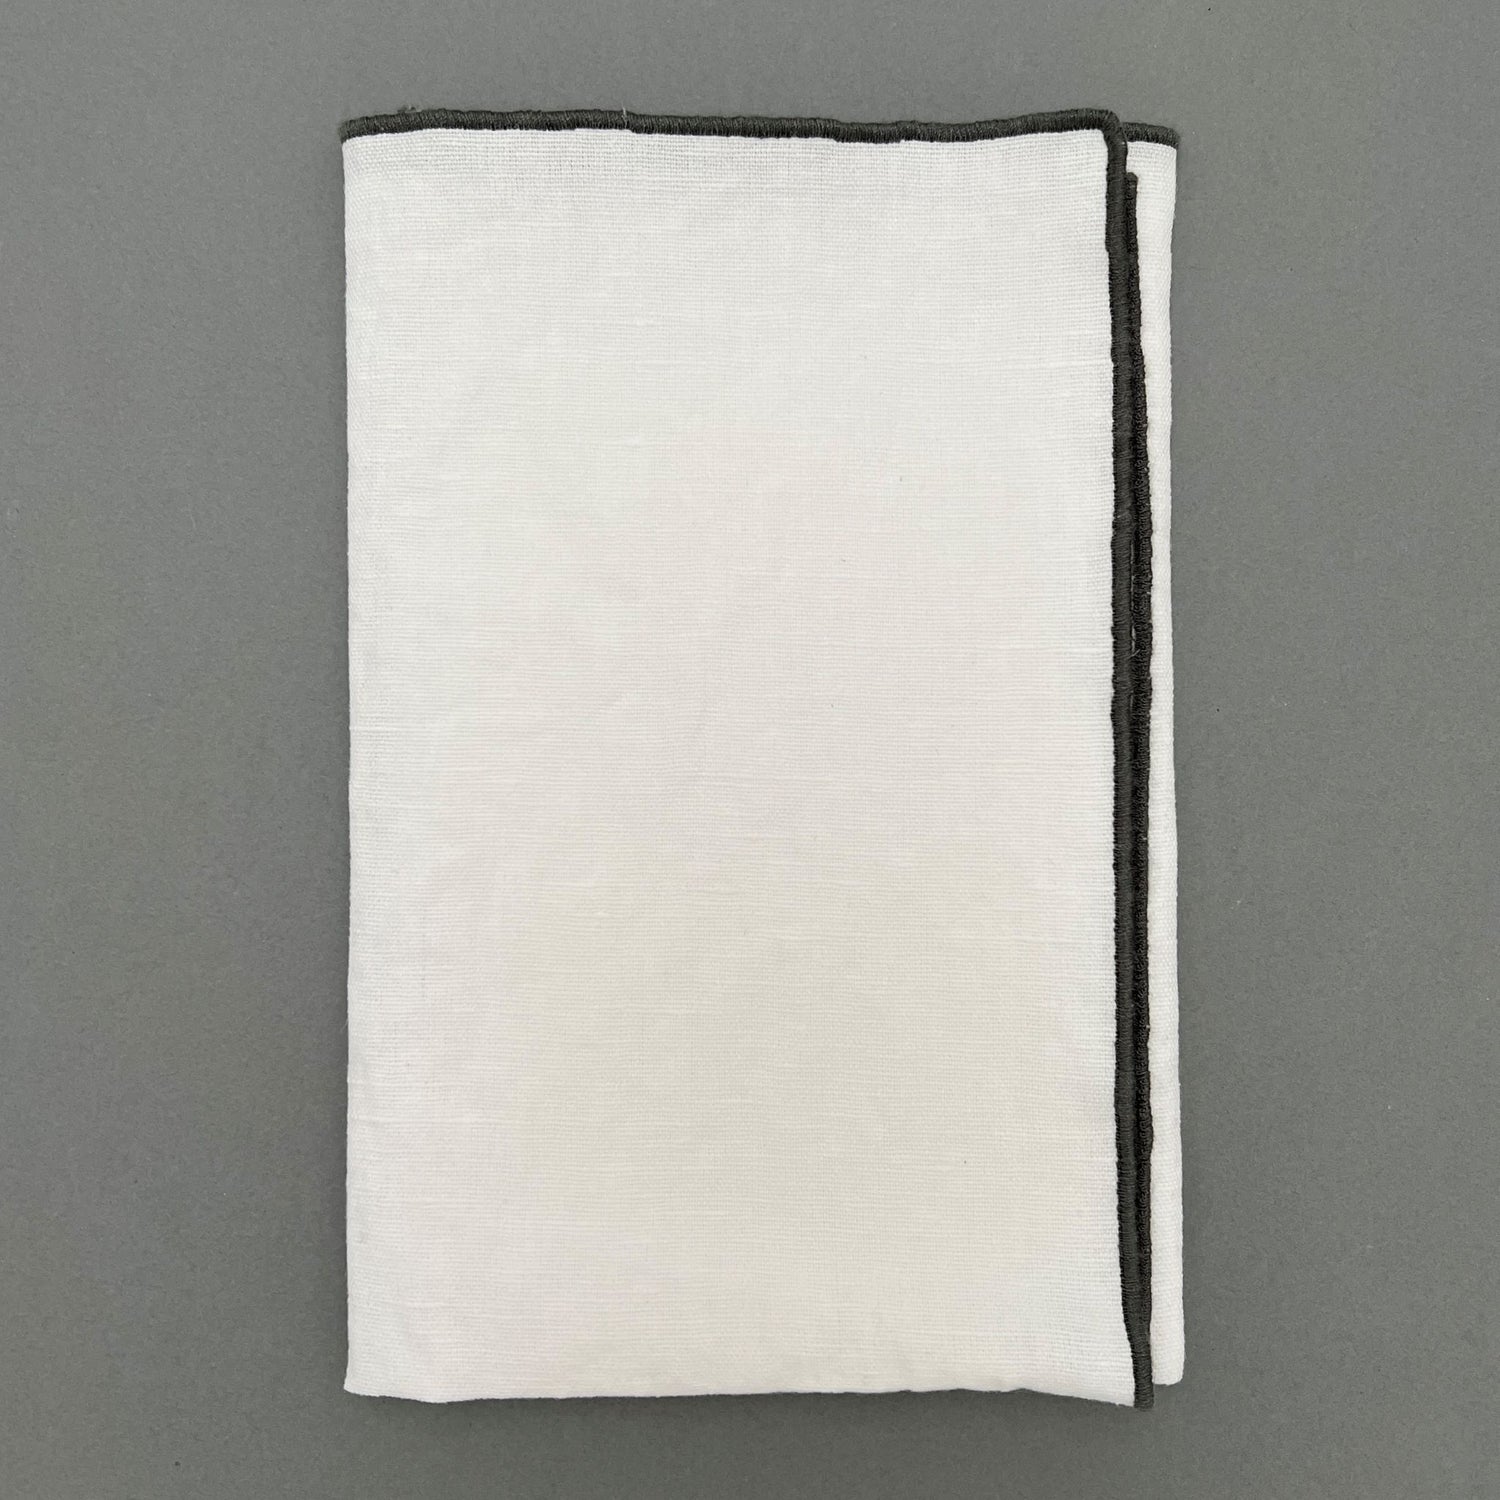 A folded white napkin with a black sewn outline laying on a gray background